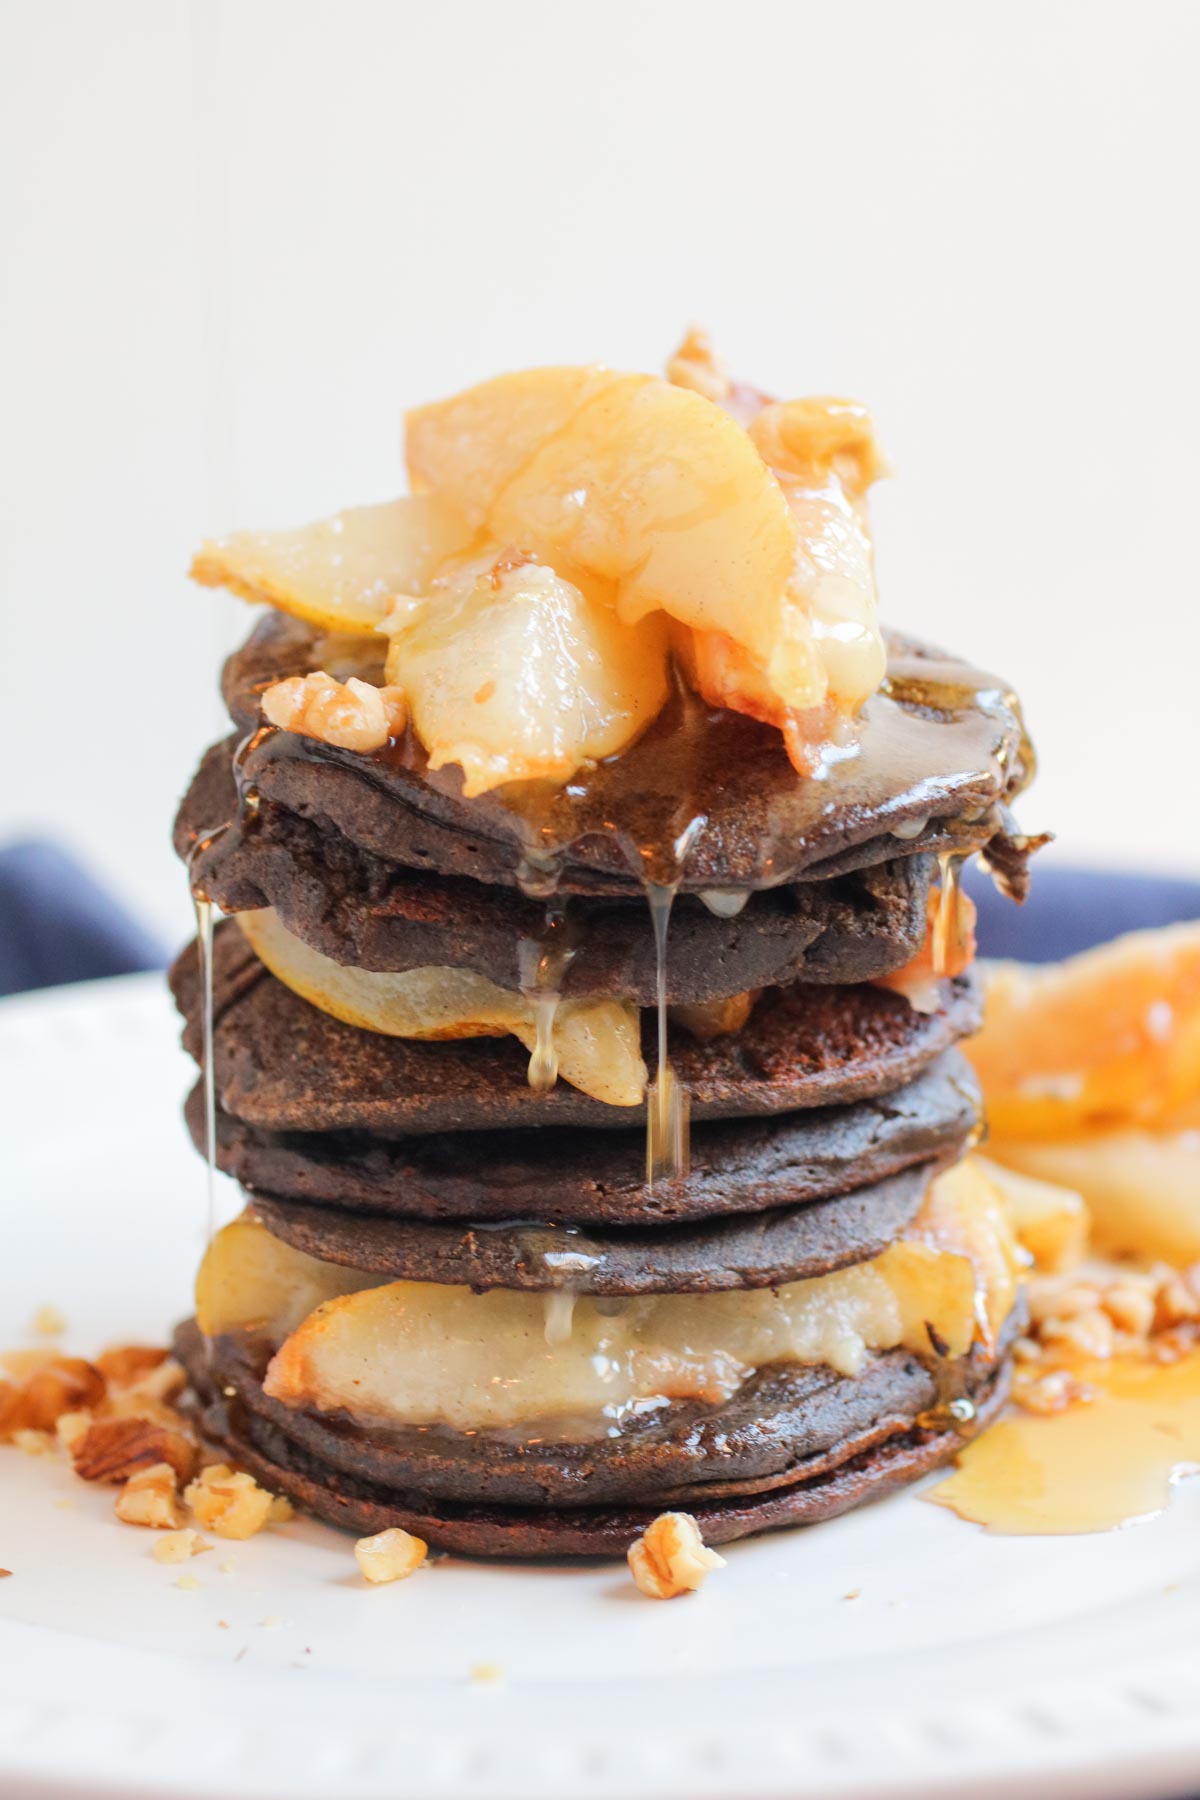 Buckwheat Sweet Potato Pancakes with Warm Cardamom Pears. This is possibly the most decadent, and uber healthy breakfast ever. Gluten free, vegan. Yaaasss! |abrakitchen.com